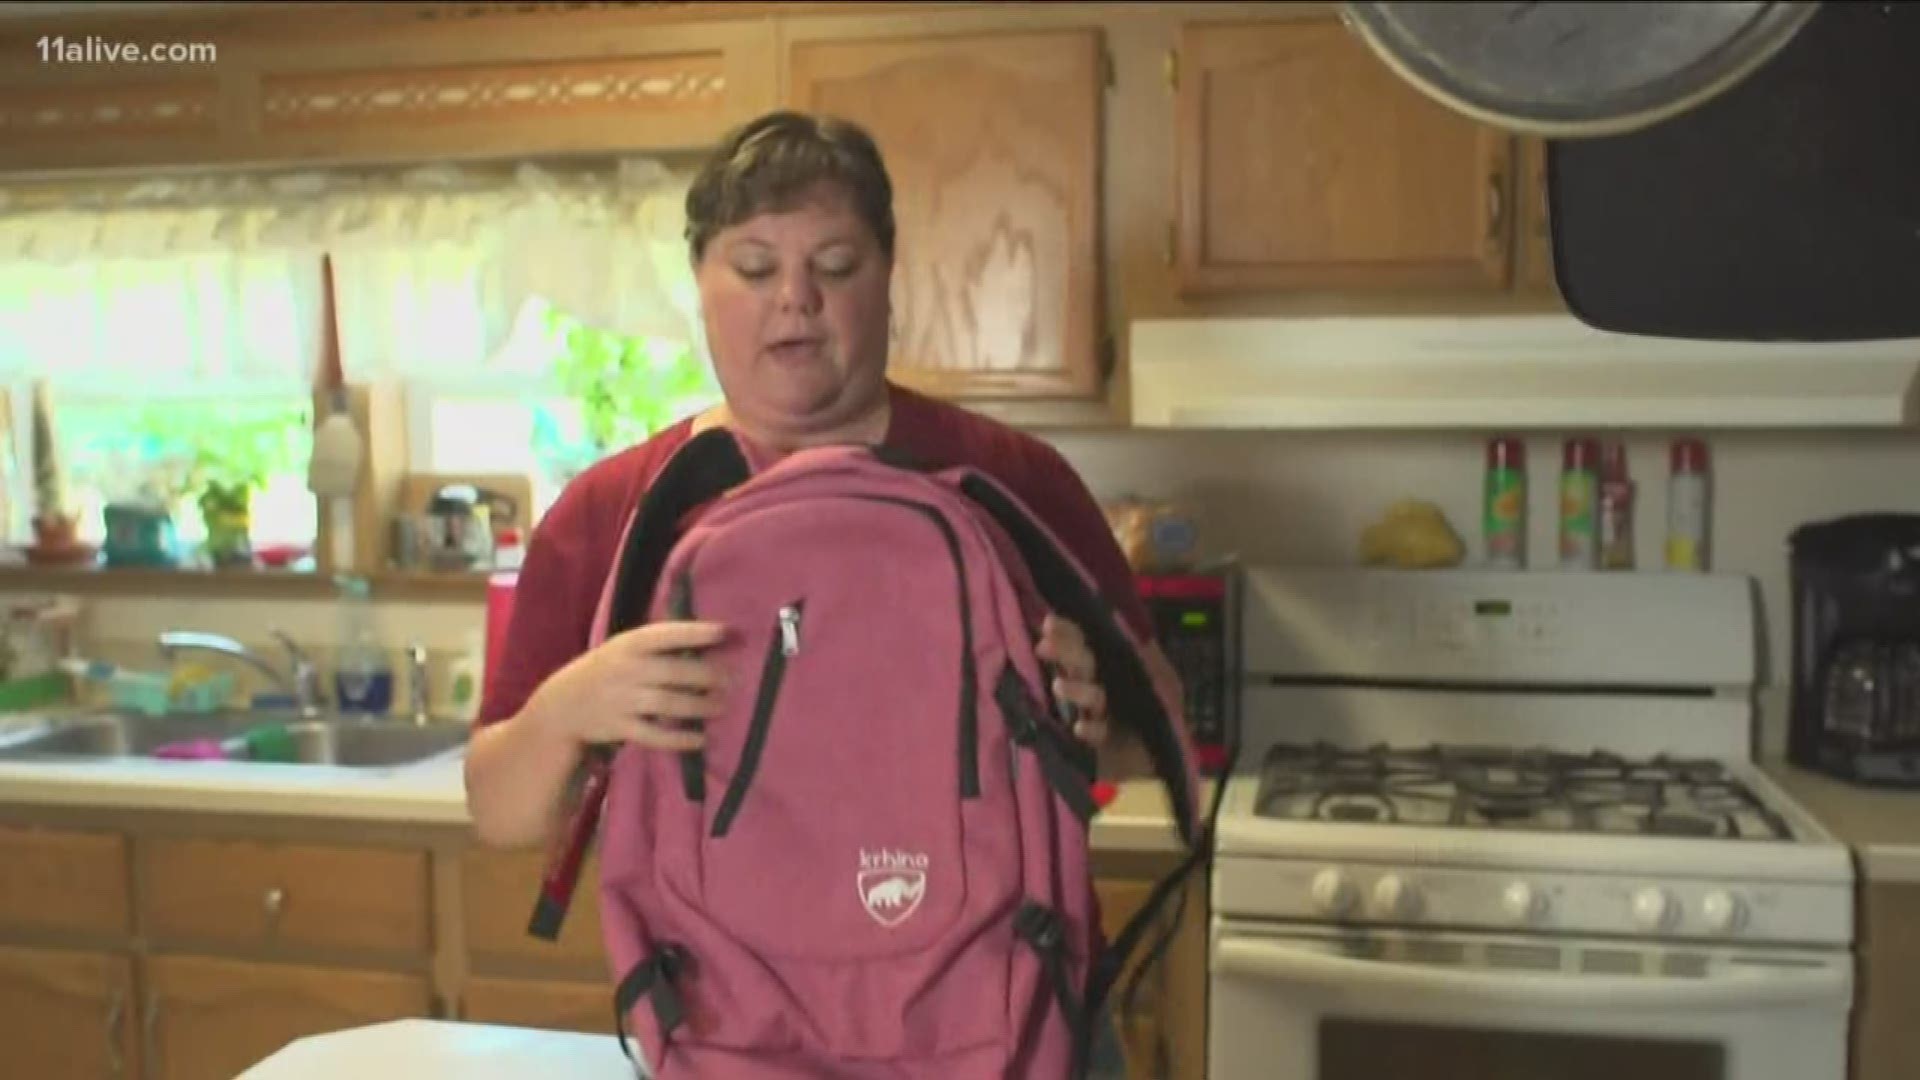 Across the country, sales of the backpacks have been surging.